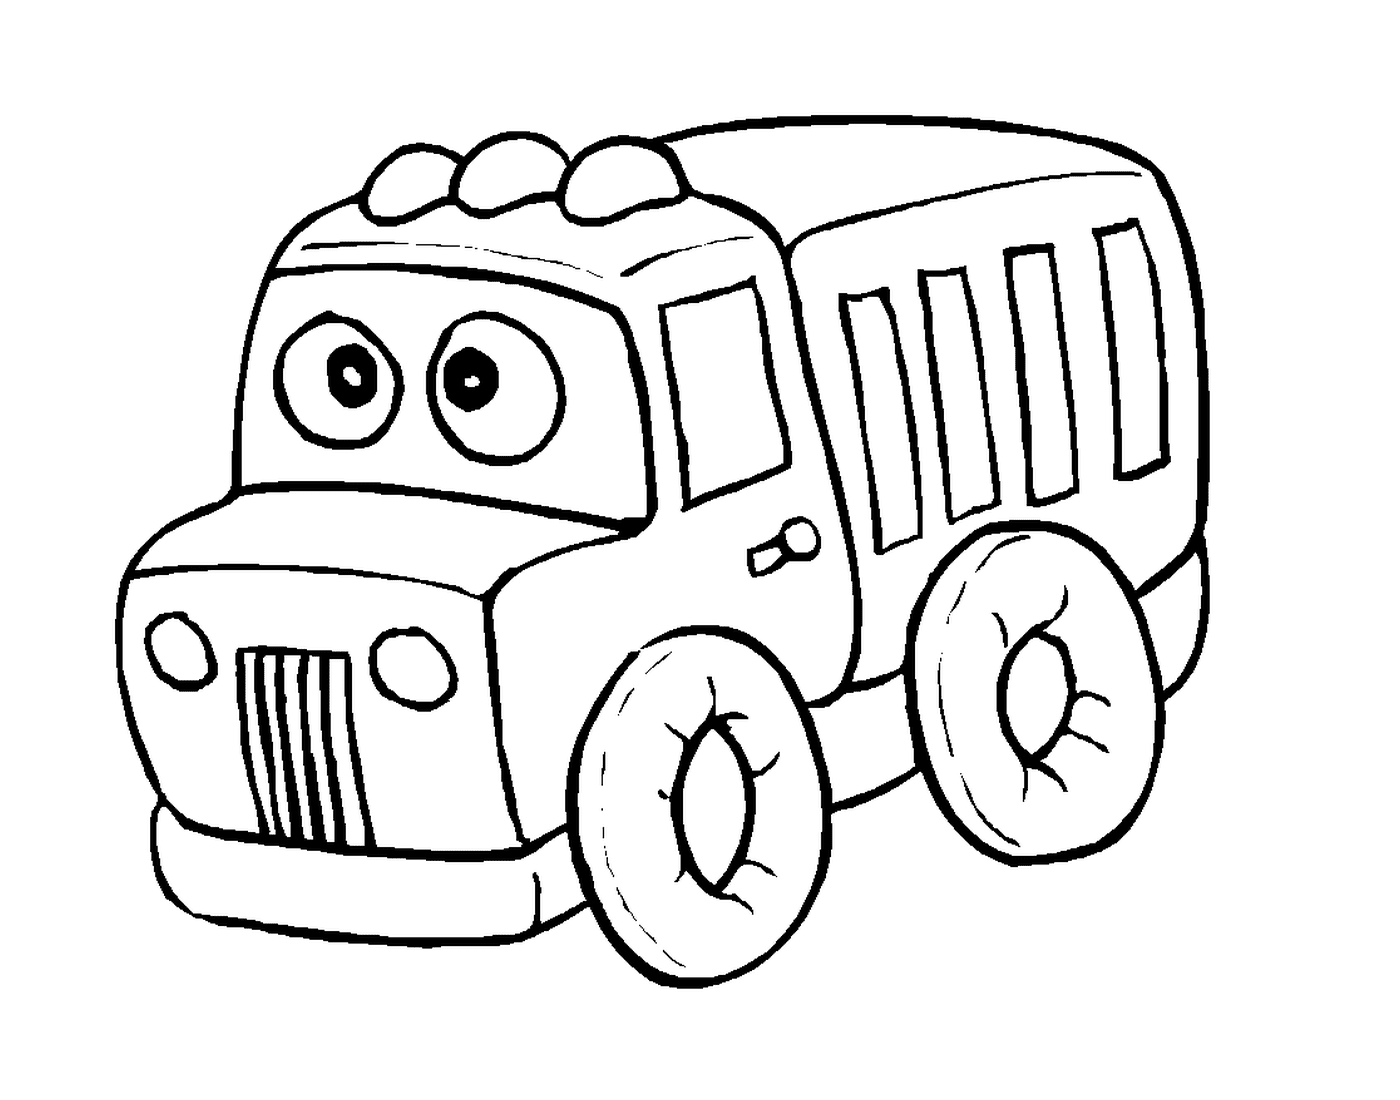  Animated and fun truck 